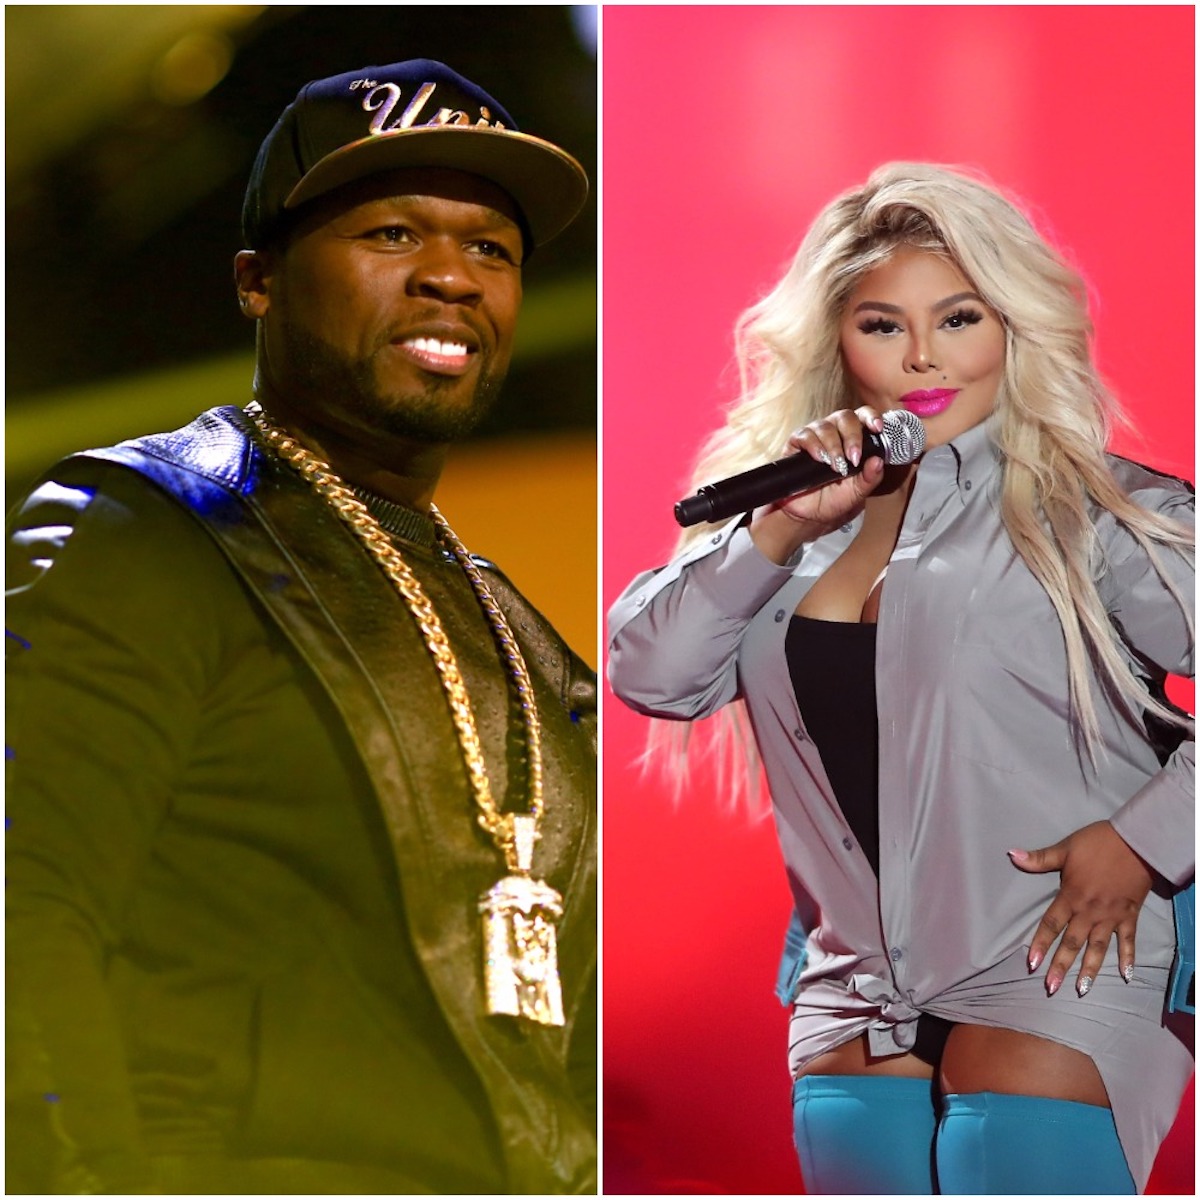 50 Cent performs on Stage and Lil Kim performs on stage